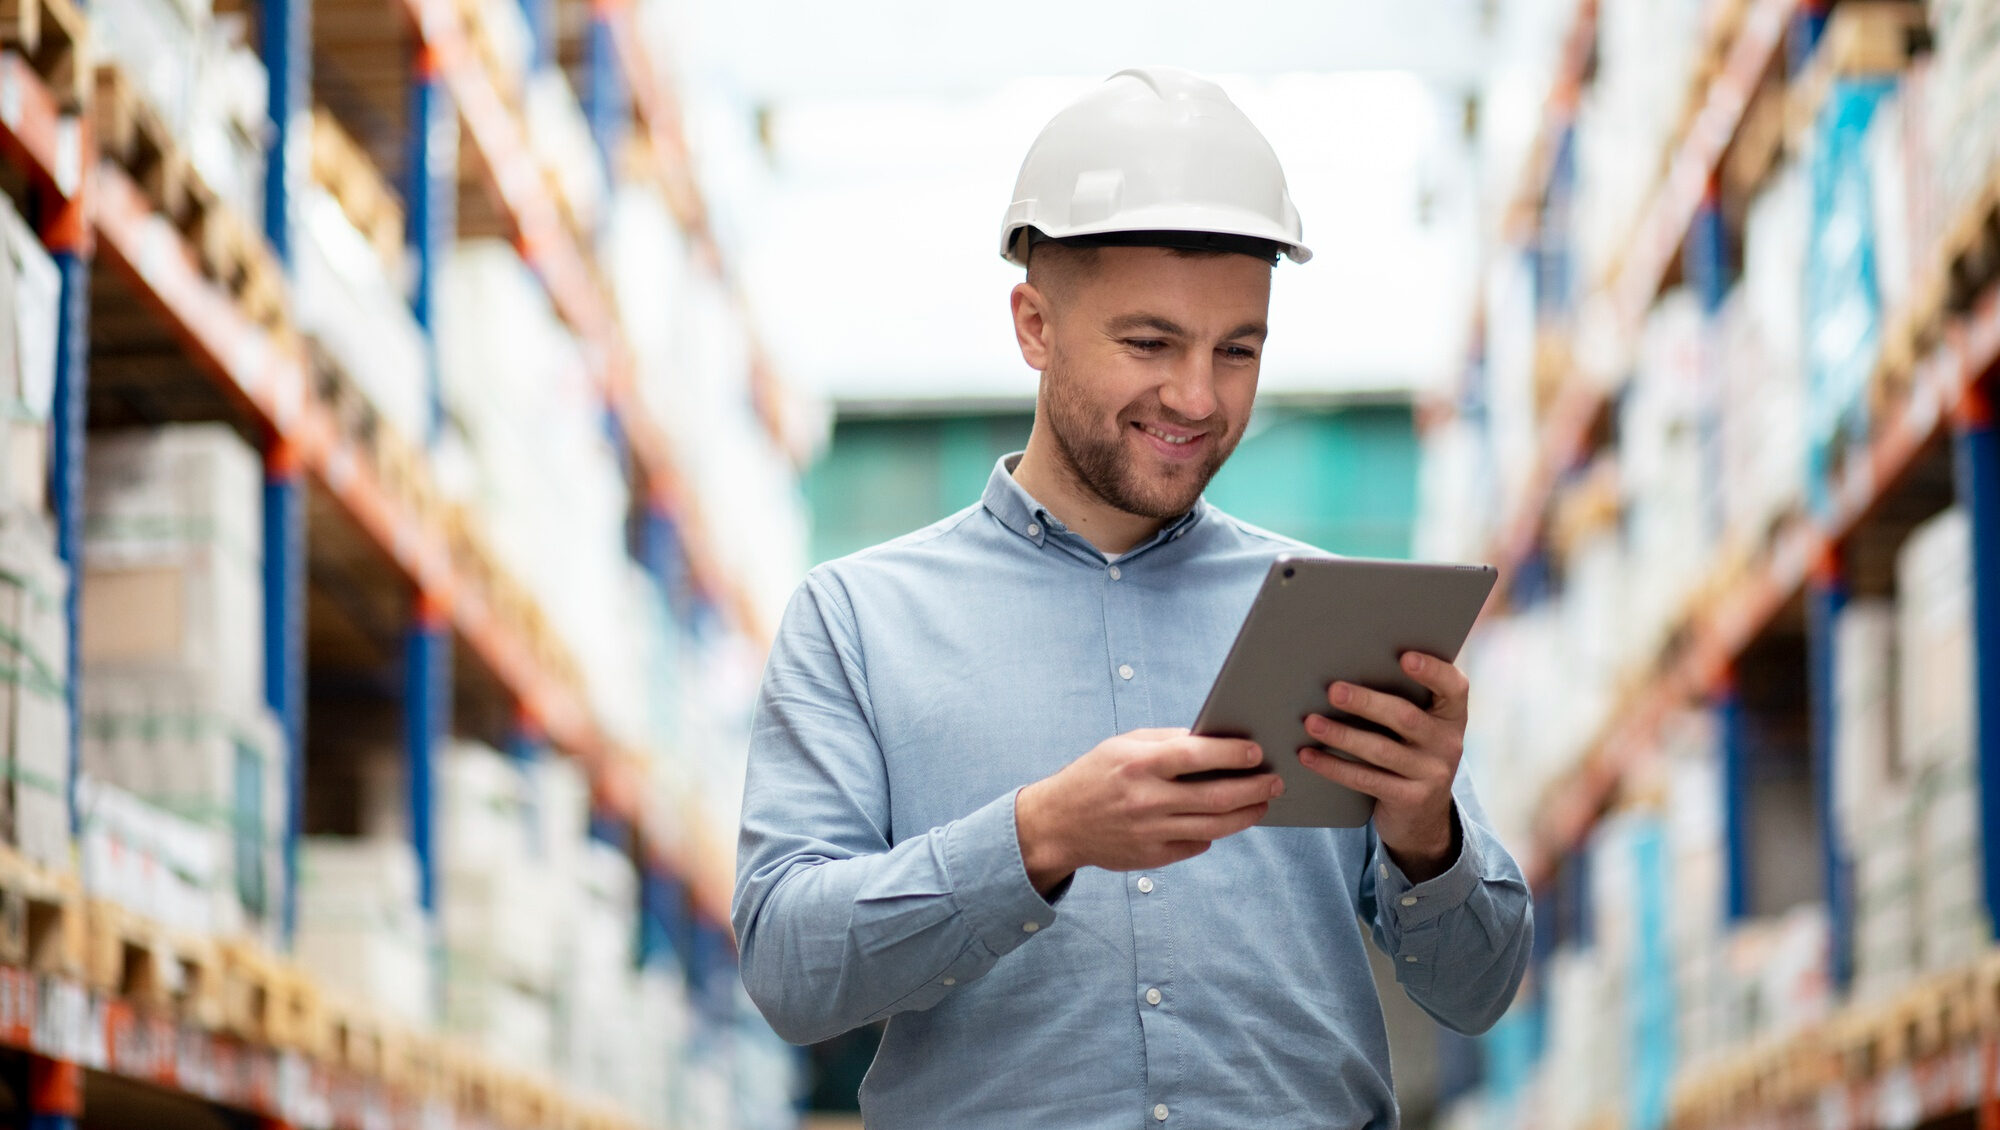 How to efficiently manage stock in warehouses?